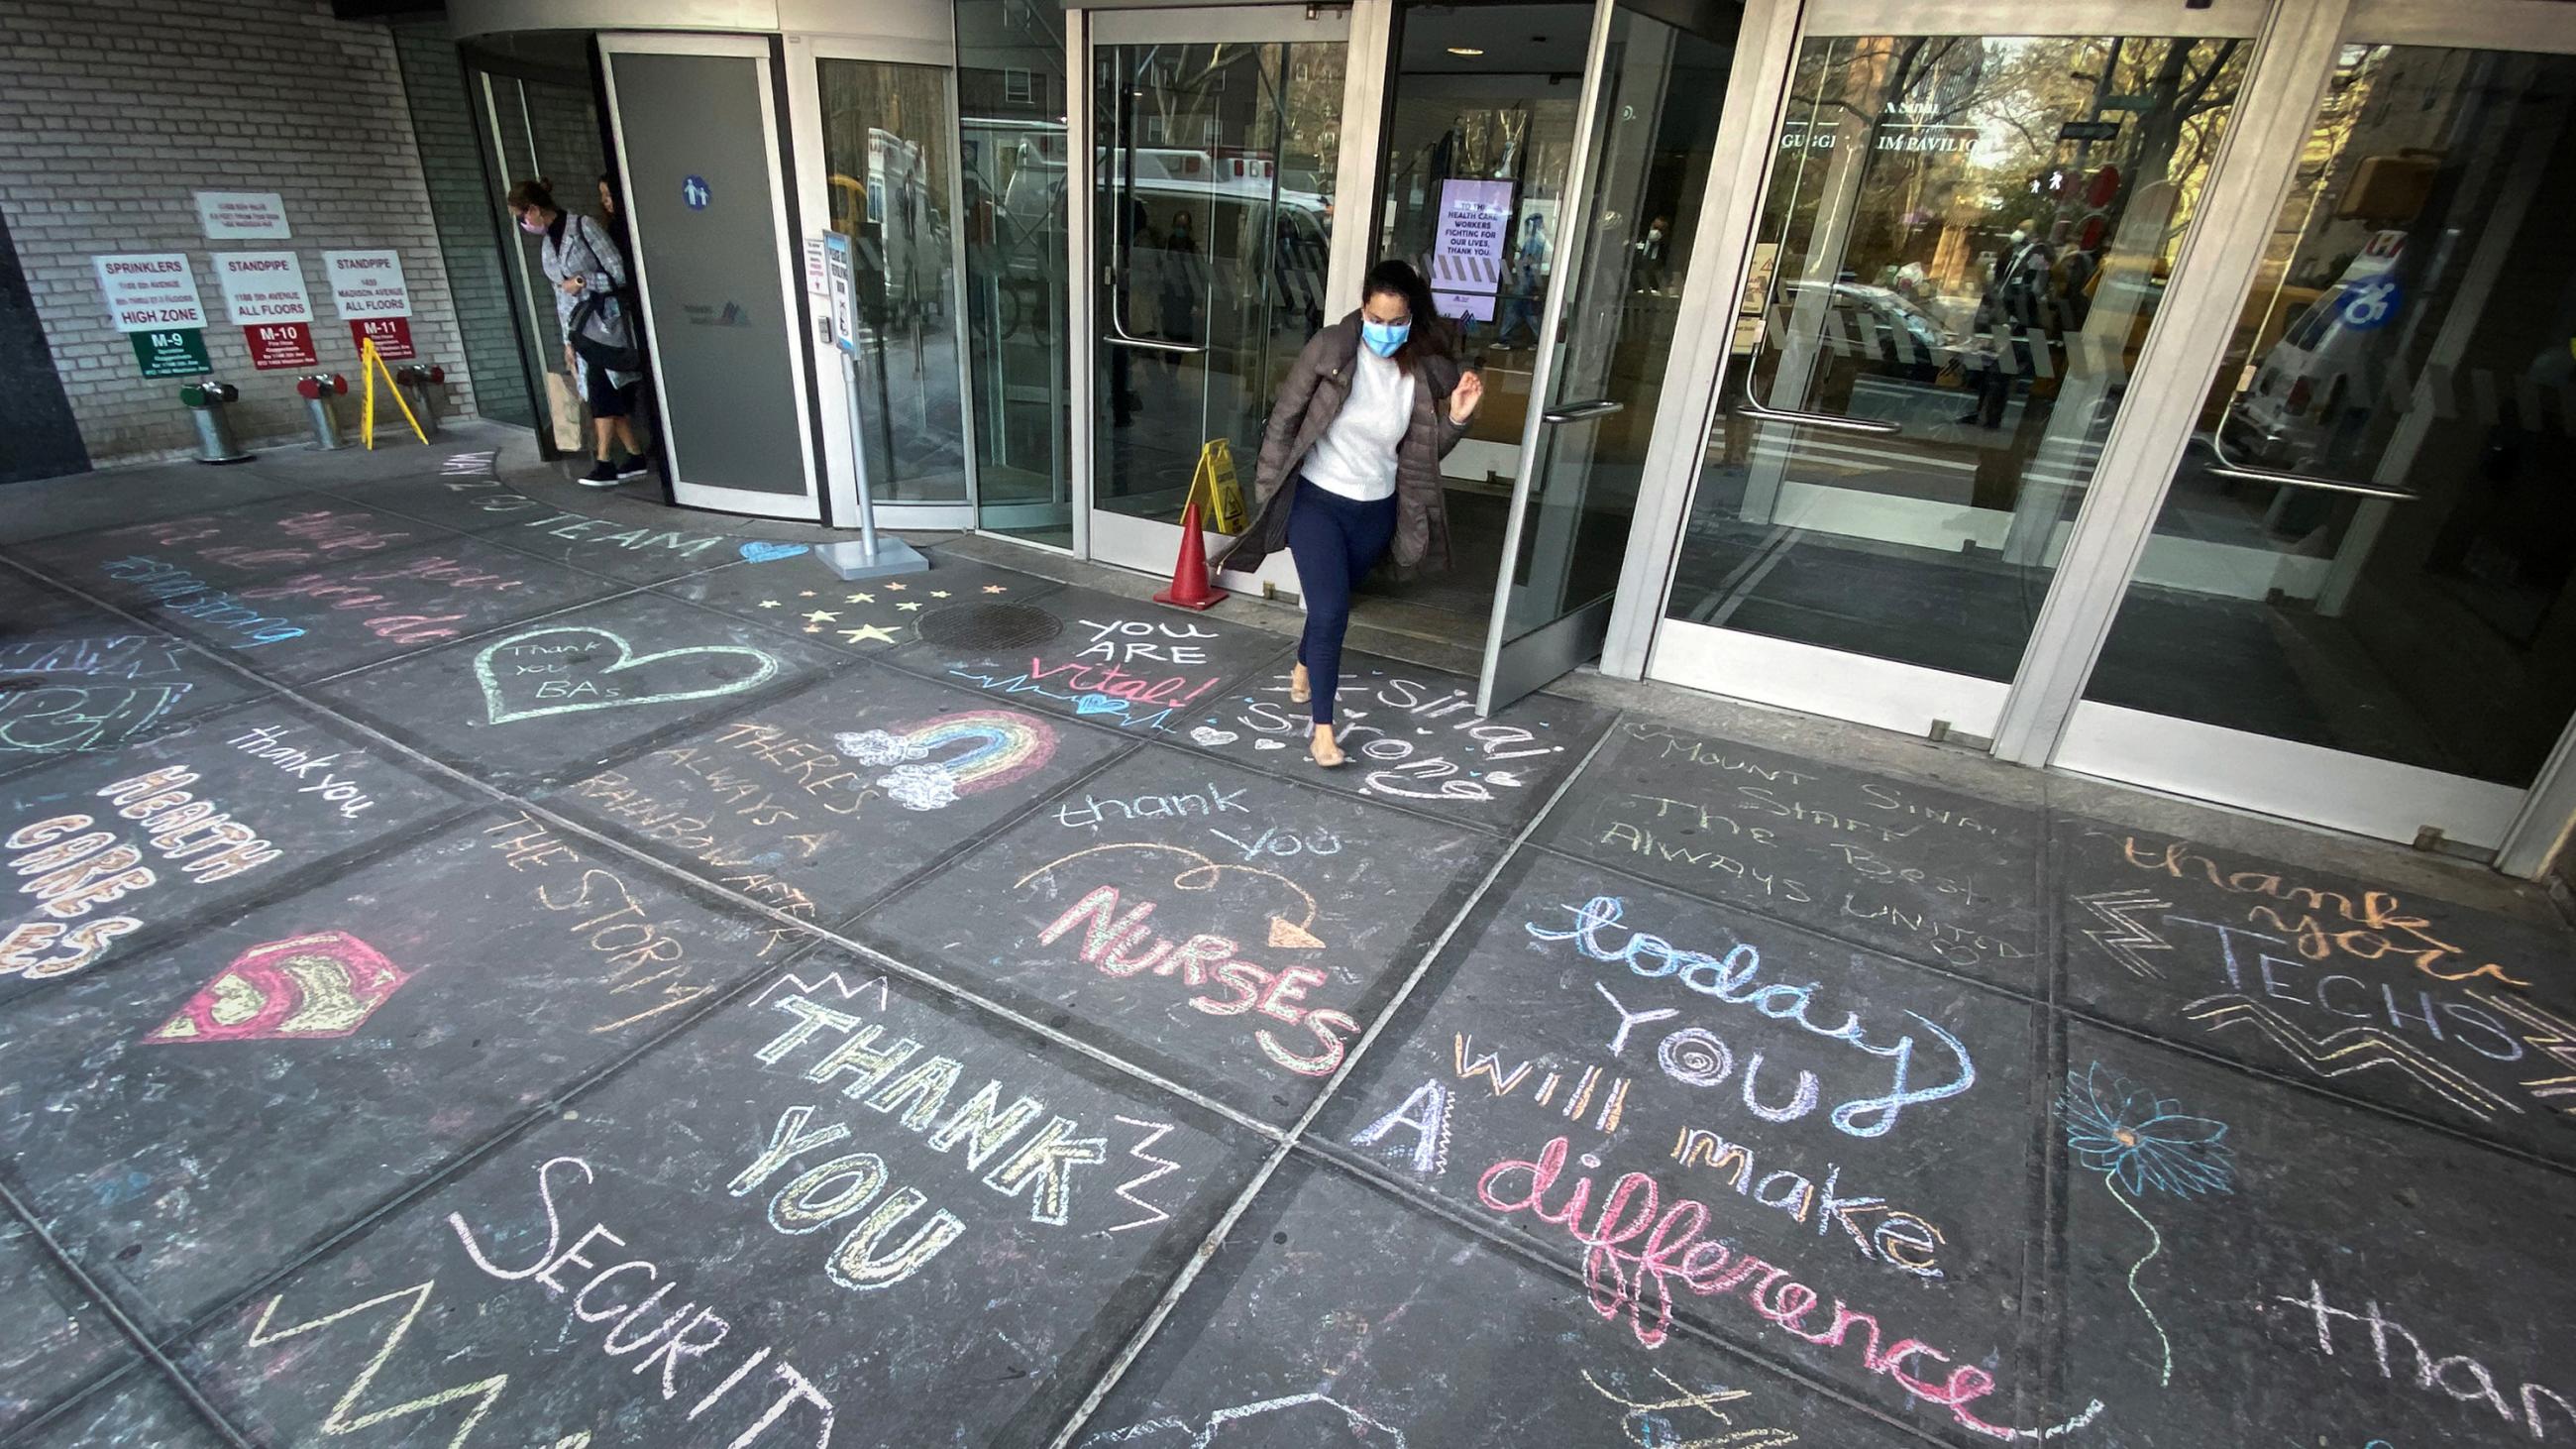 The photo shows an entrance to the hospital with a large number of colorful messages of thanks written in chalk on the sidewalk outside. 